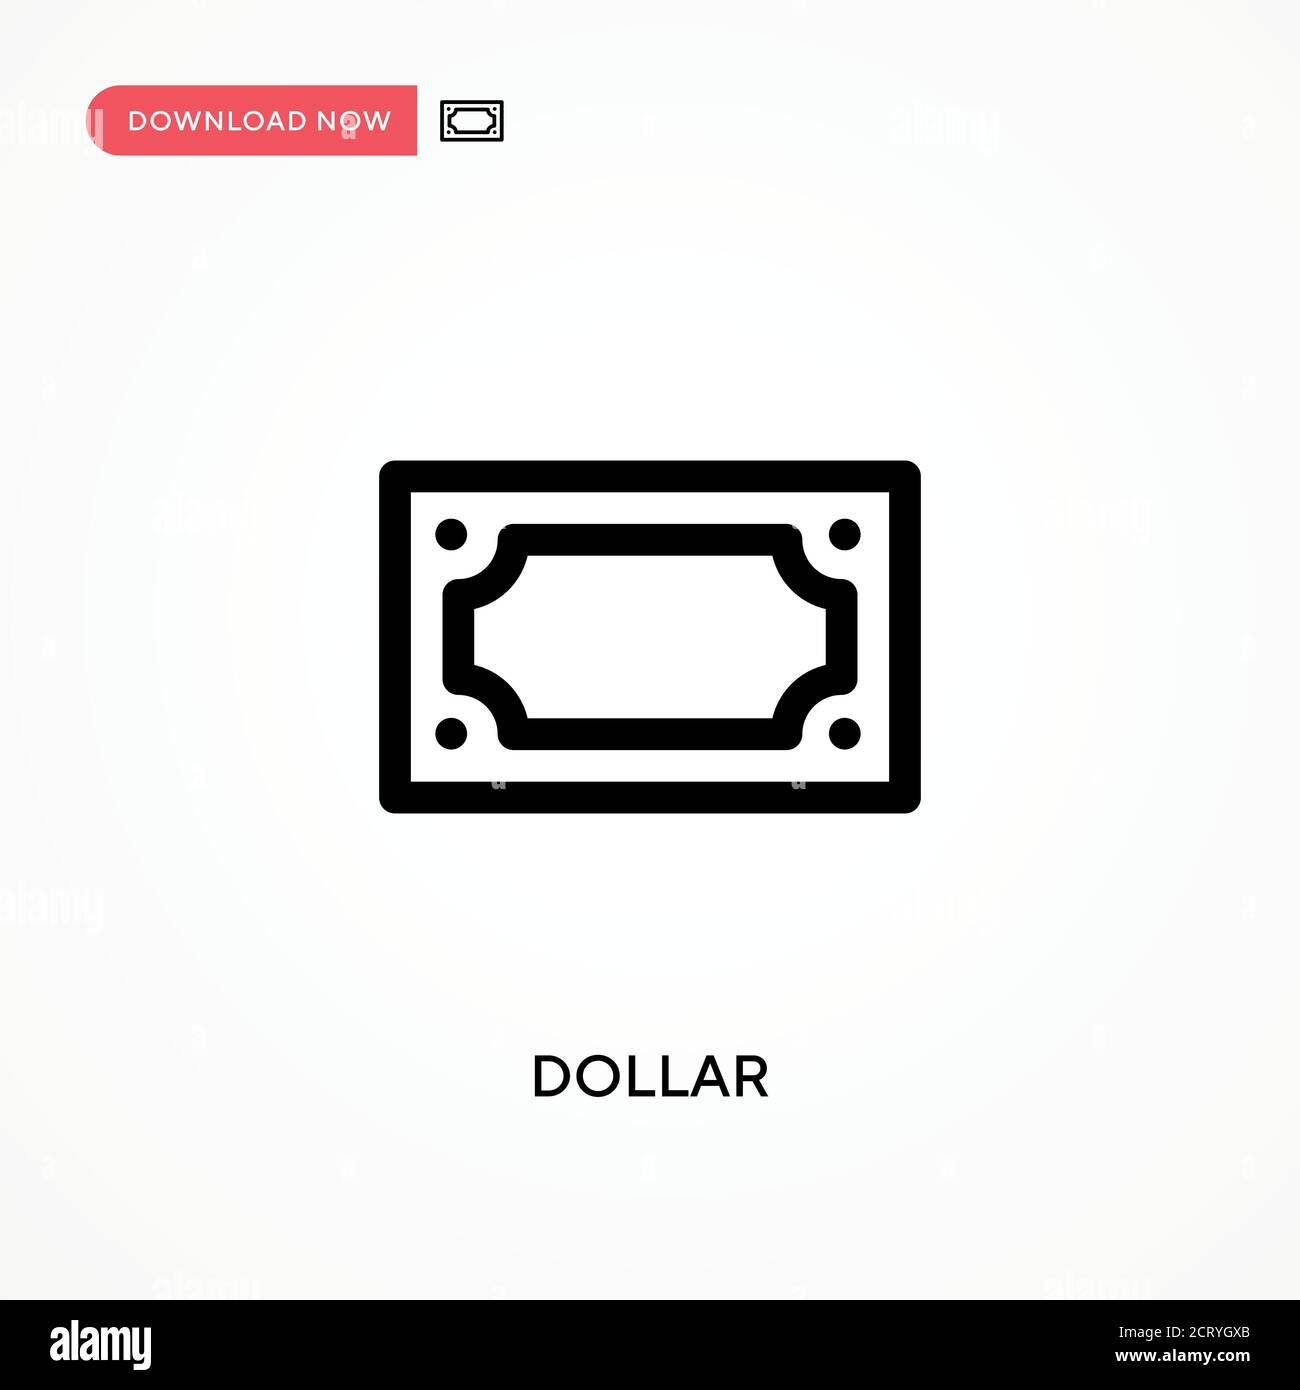 Dollar Simple vector icon. Modern, simple flat vector illustration for web site or mobile app Stock Vector